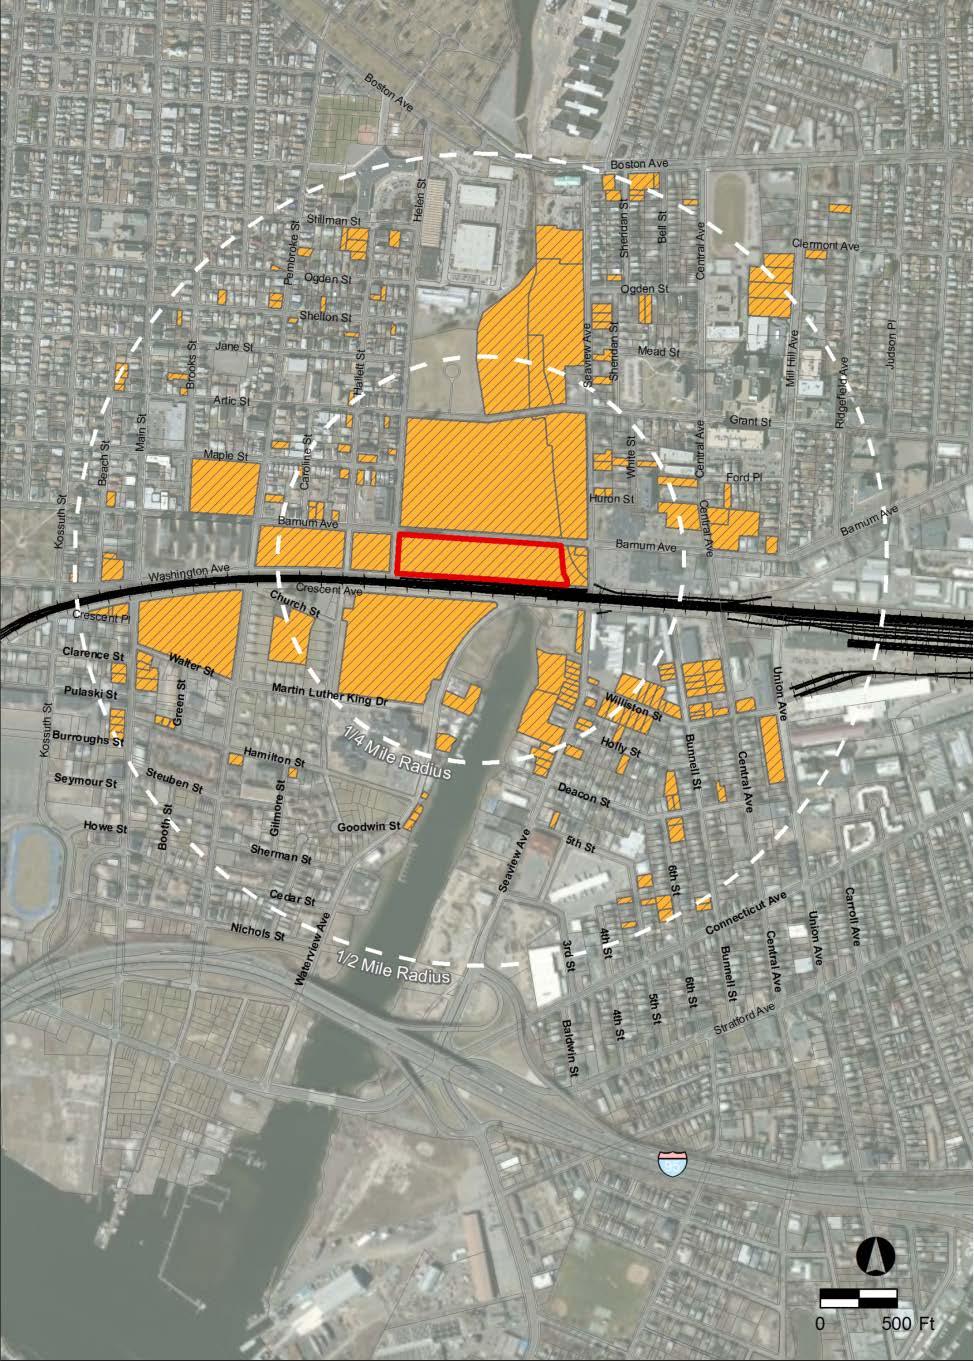 Vacant/Underutilized Parcels 2/3 of the inner core area is vacant or underutilized Most in